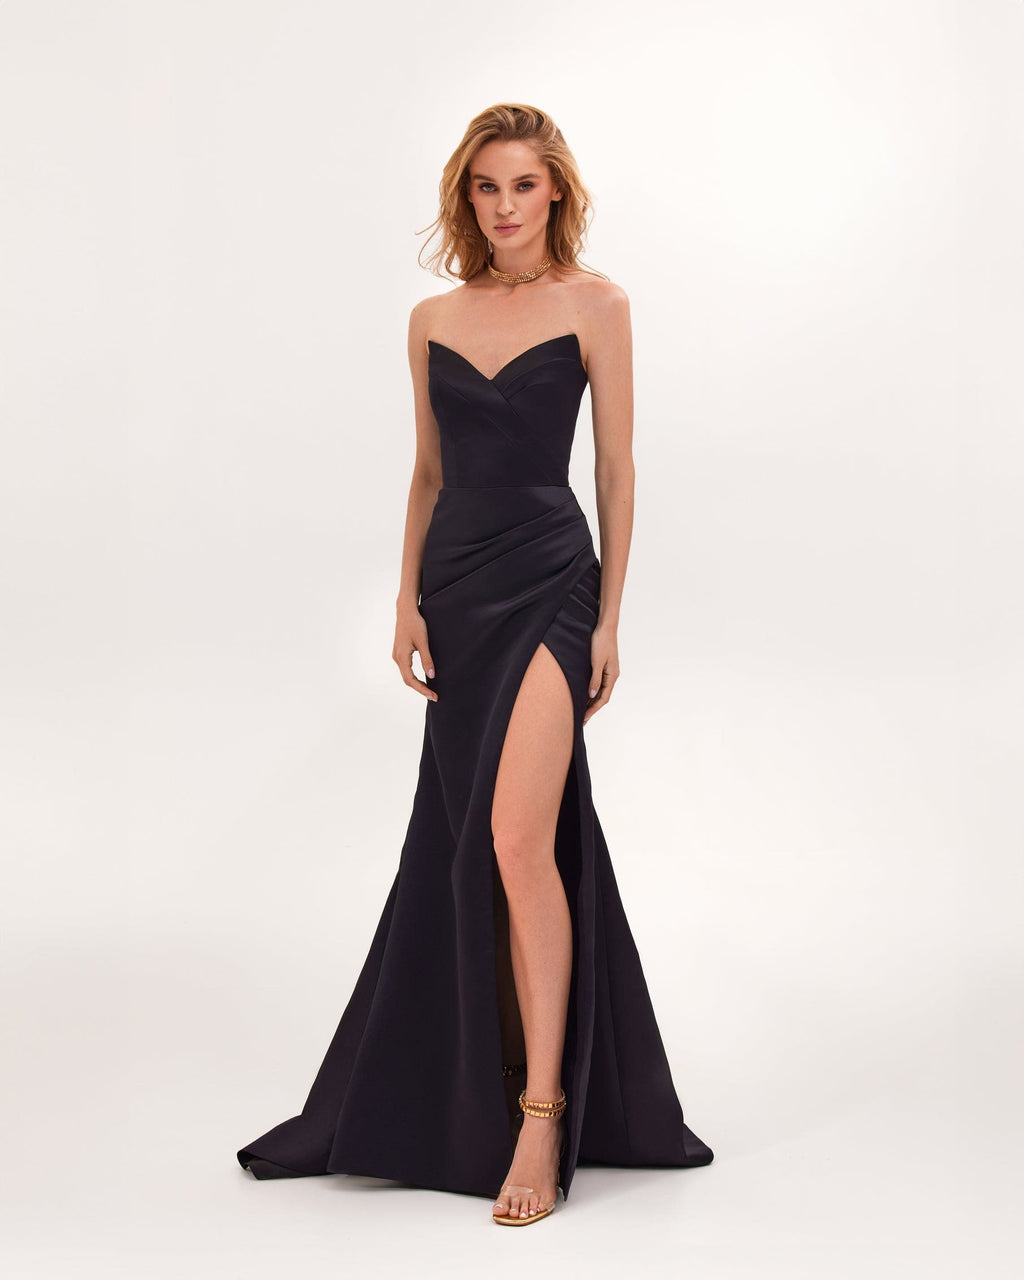 Women's A-Line Formal Dresses & Evening Gowns | Nordstrom